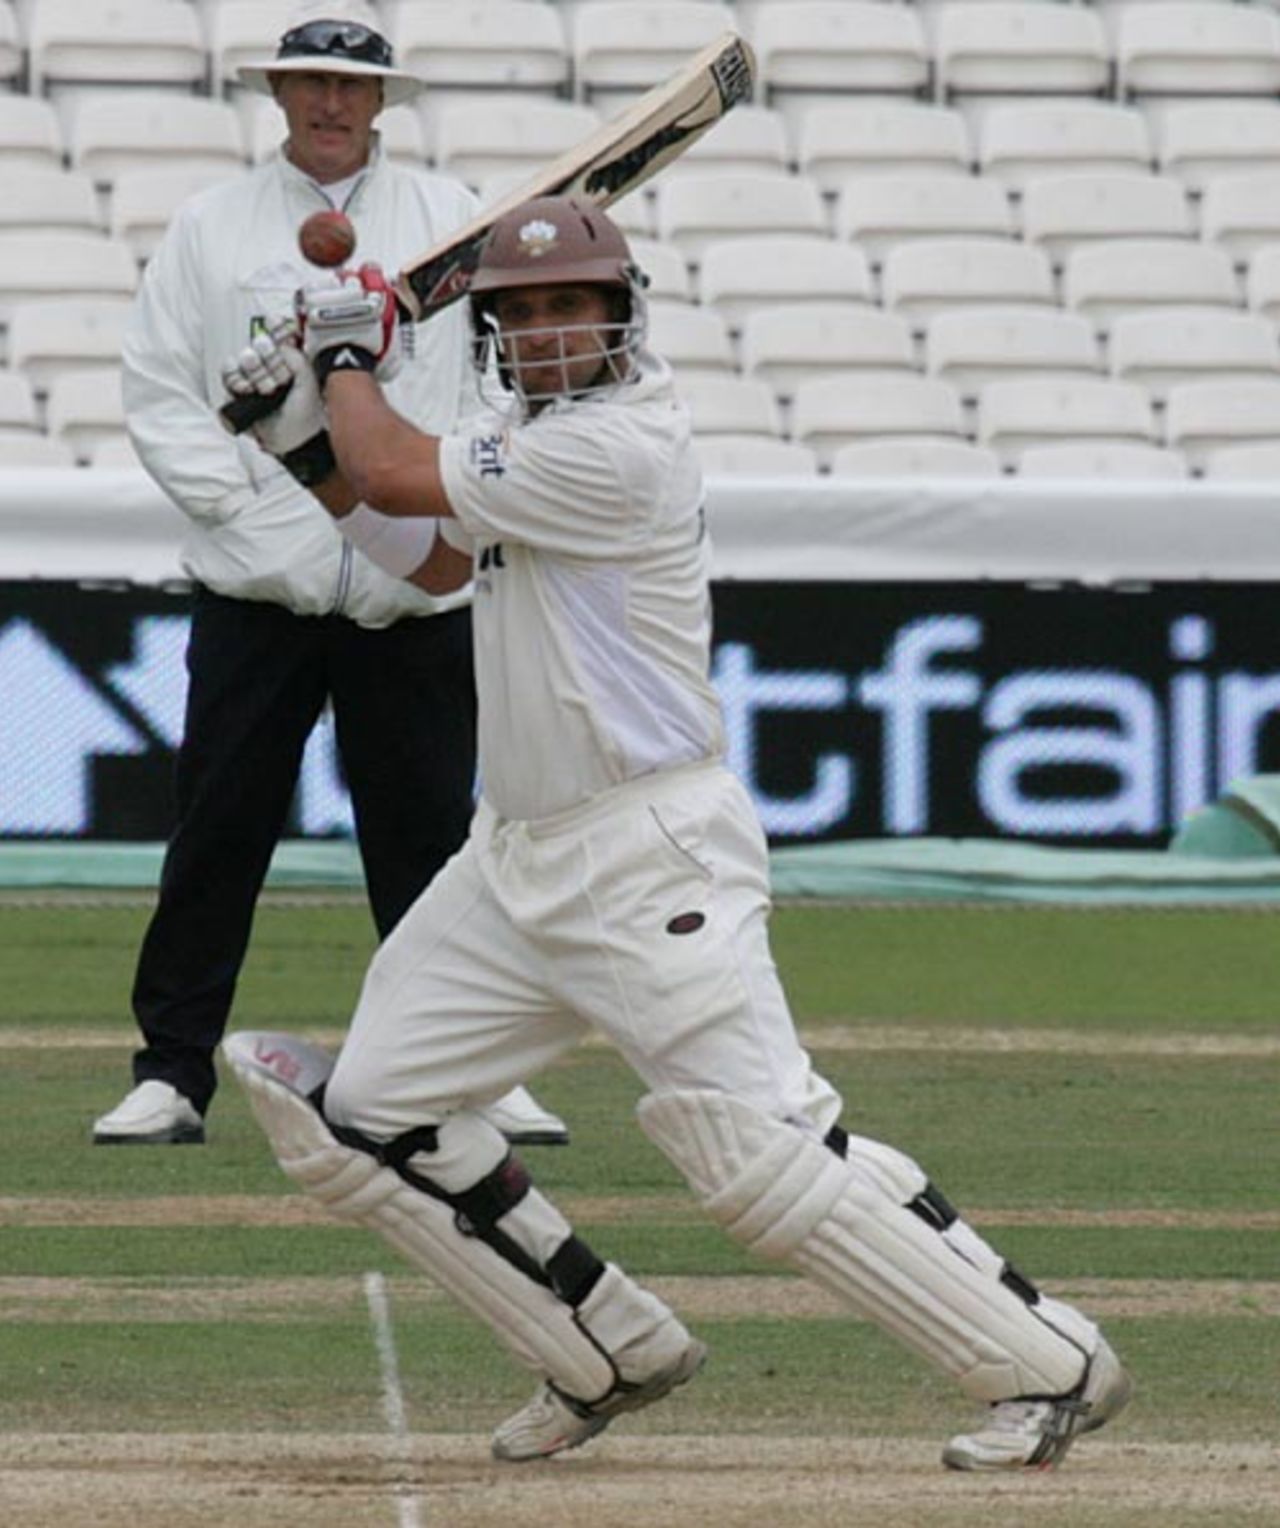 Mark Butcher cover drives on his way to 43, Surrey v Lancashire, The Oval, September 21, 2997